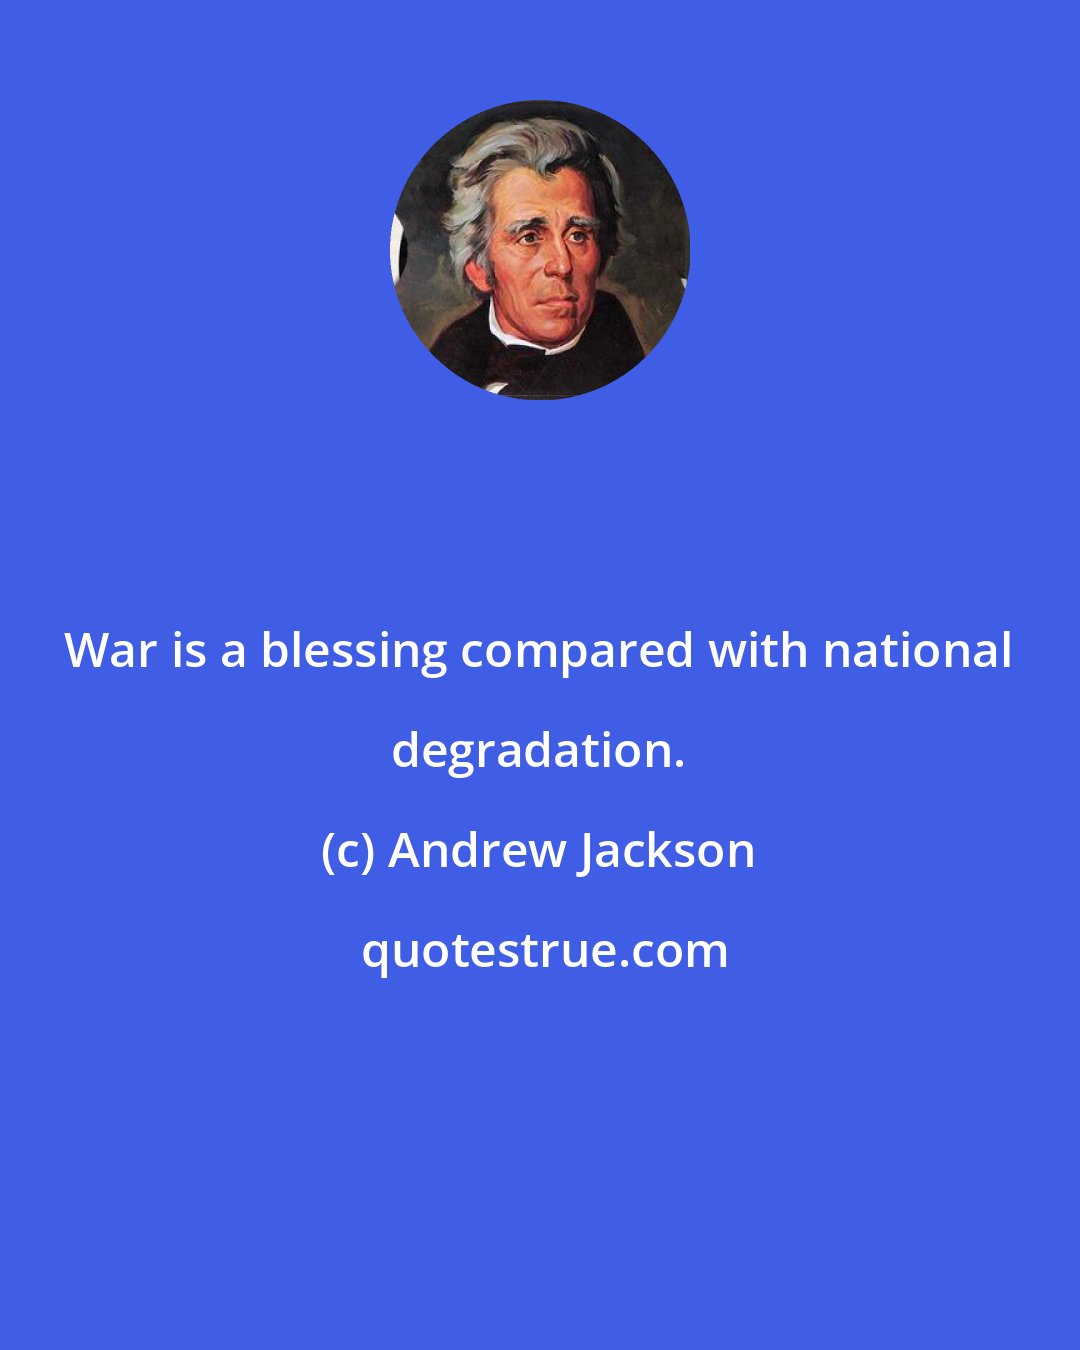 Andrew Jackson: War is a blessing compared with national degradation.